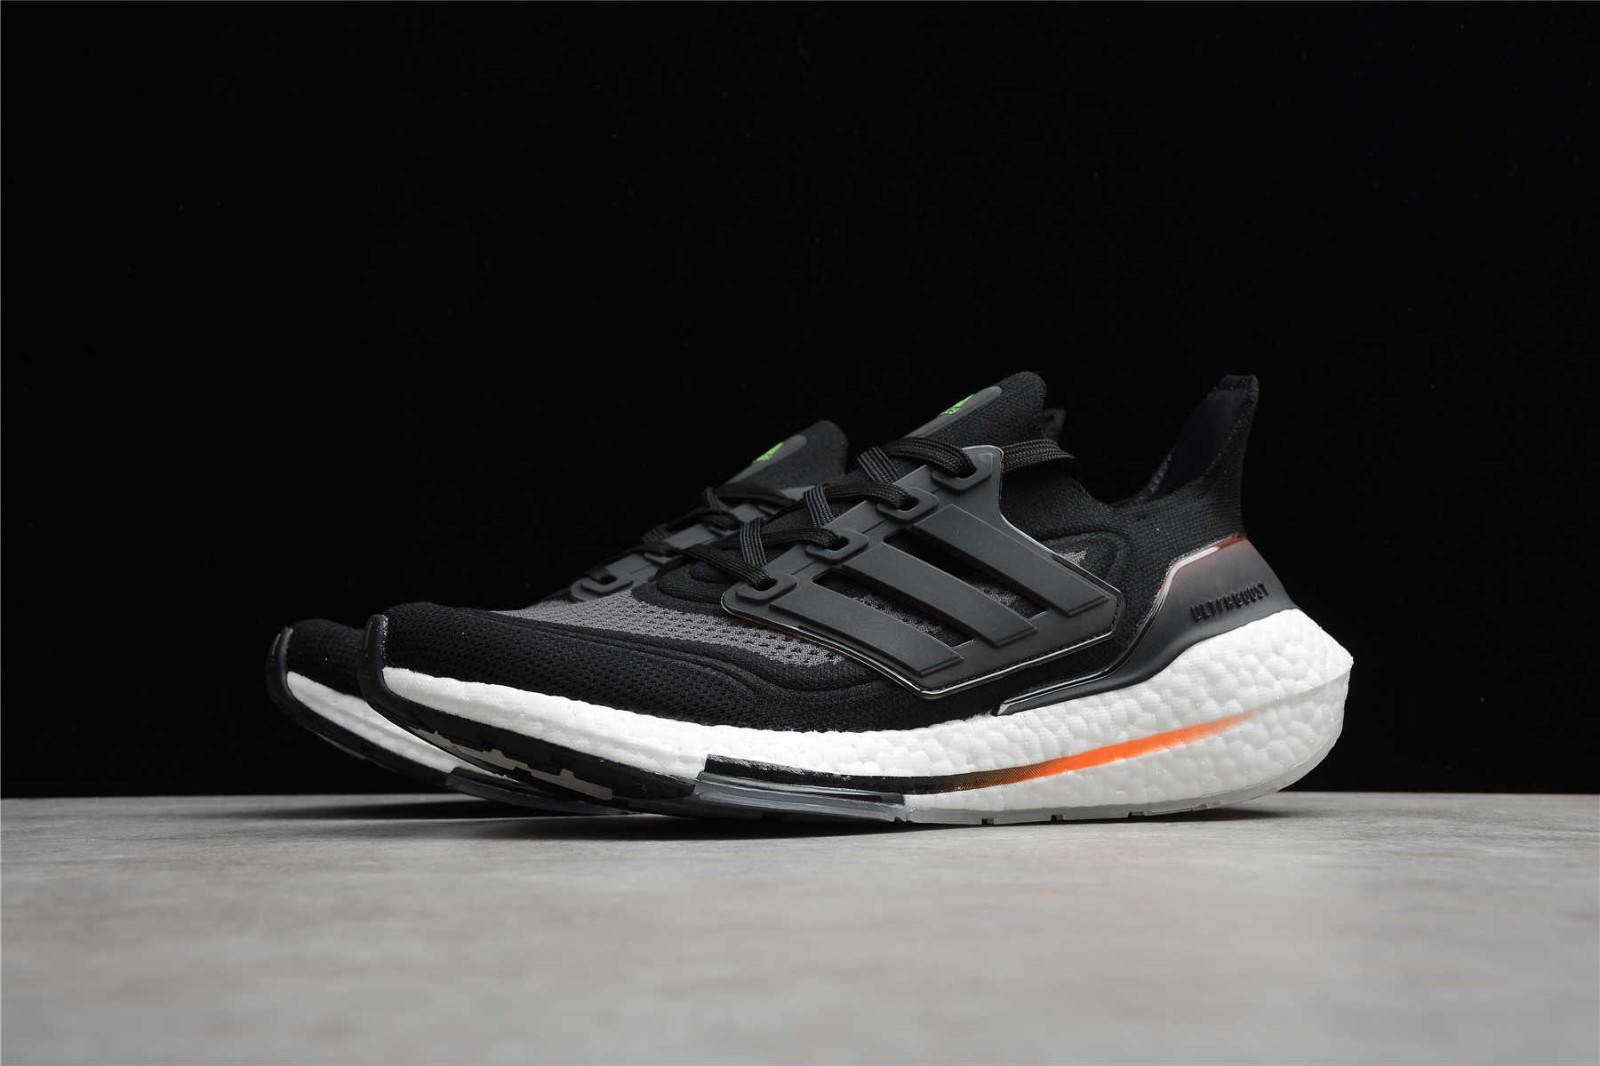 Adidas Ultra Boost 21 Consortium Core Black Grey Cloud White FZ2056 Sepsale - and adidas have this time turned their towards the latters